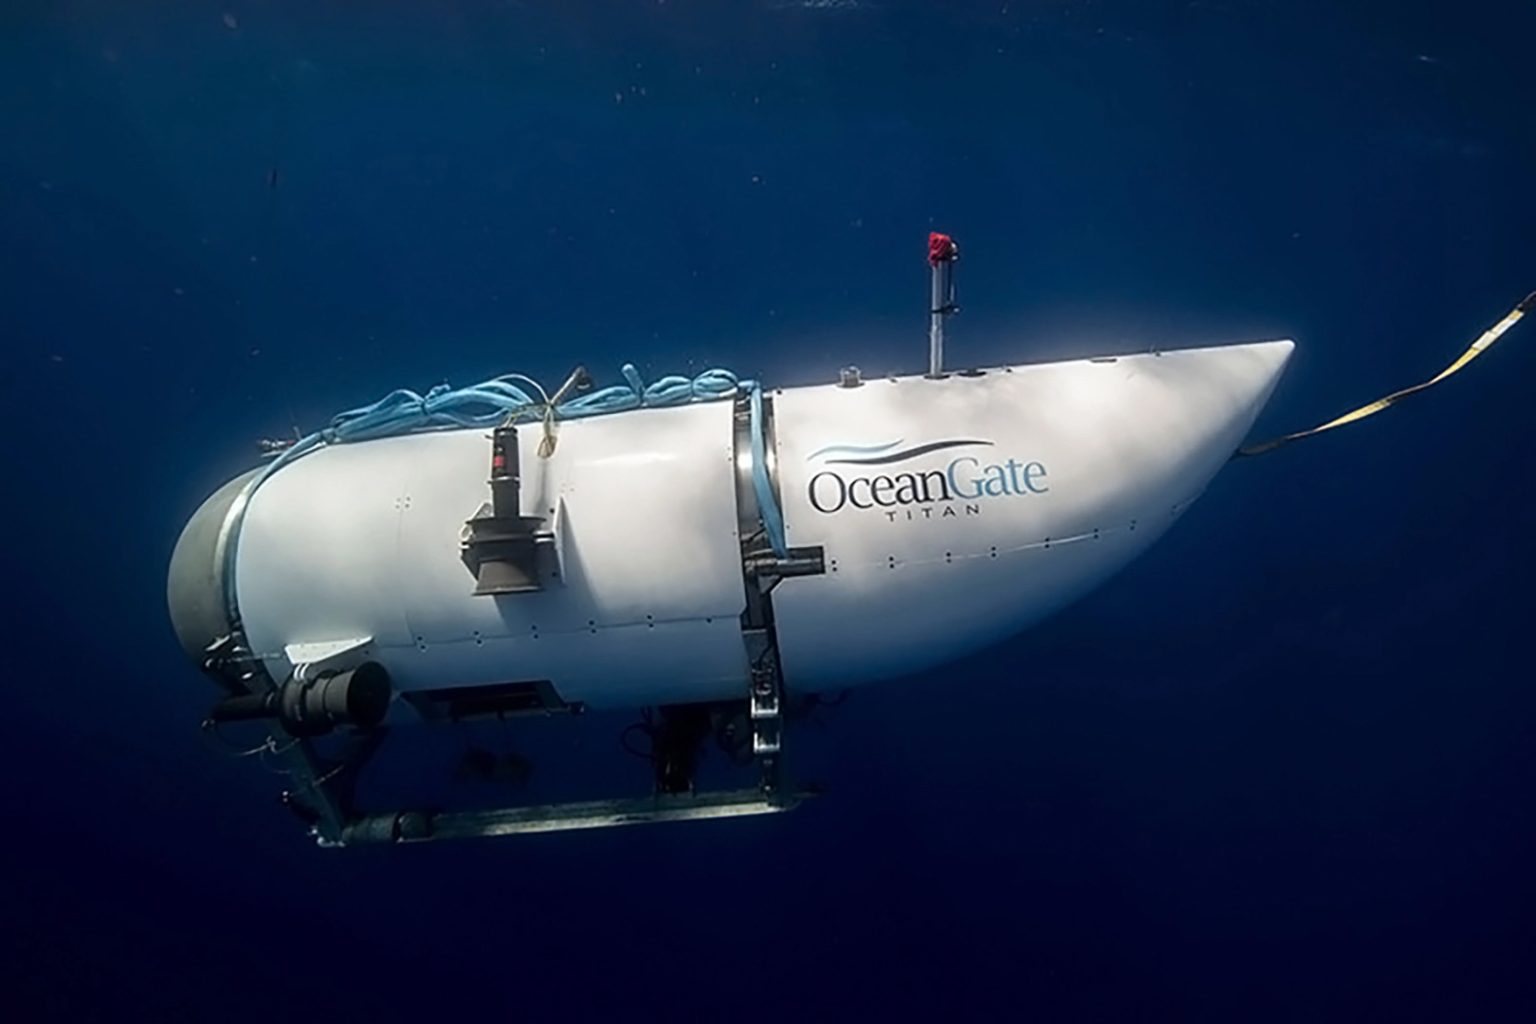 Image of the OceanGate Submersible Titan, missing since June 18 in the vicinity of the sunken hull of the RMS Titanic